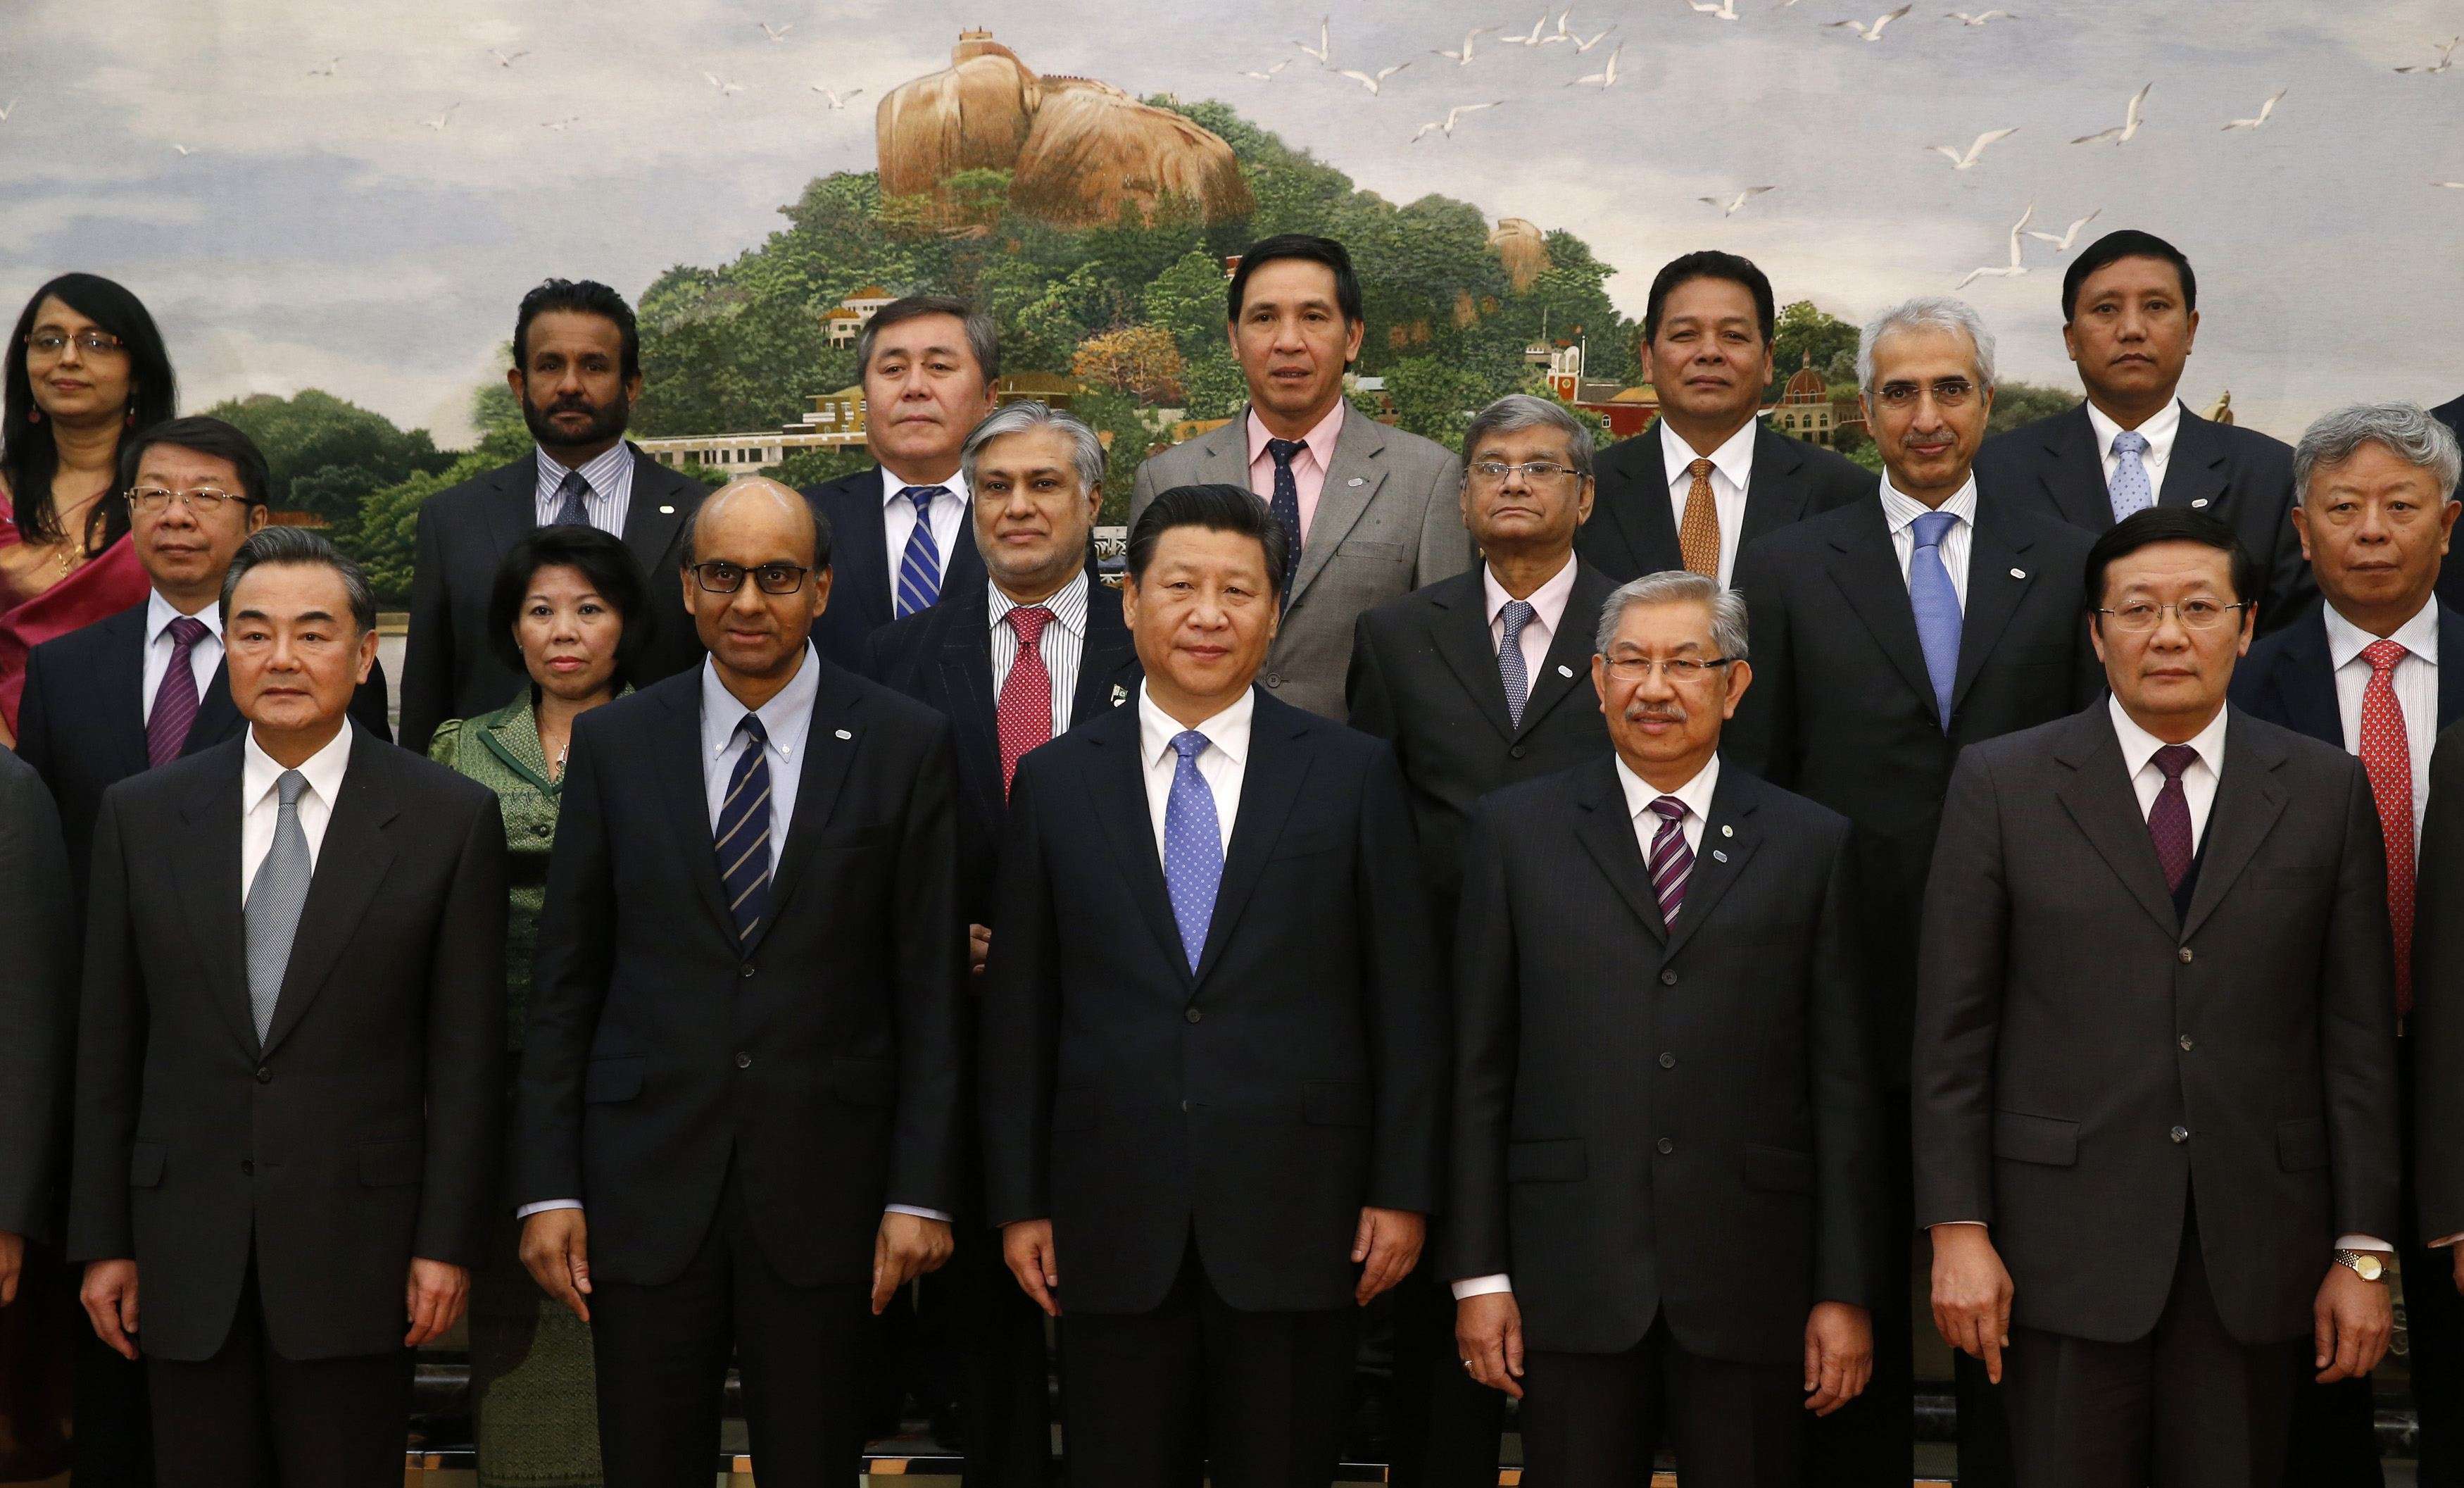 President Xi Jinping and Foreign Minister Wang Yi (far left) with delegates from member states at the launch of the Asian Infrastructure Investment Bank, in the Great Hall of the People on October 24, 2014. Photo: Reuters